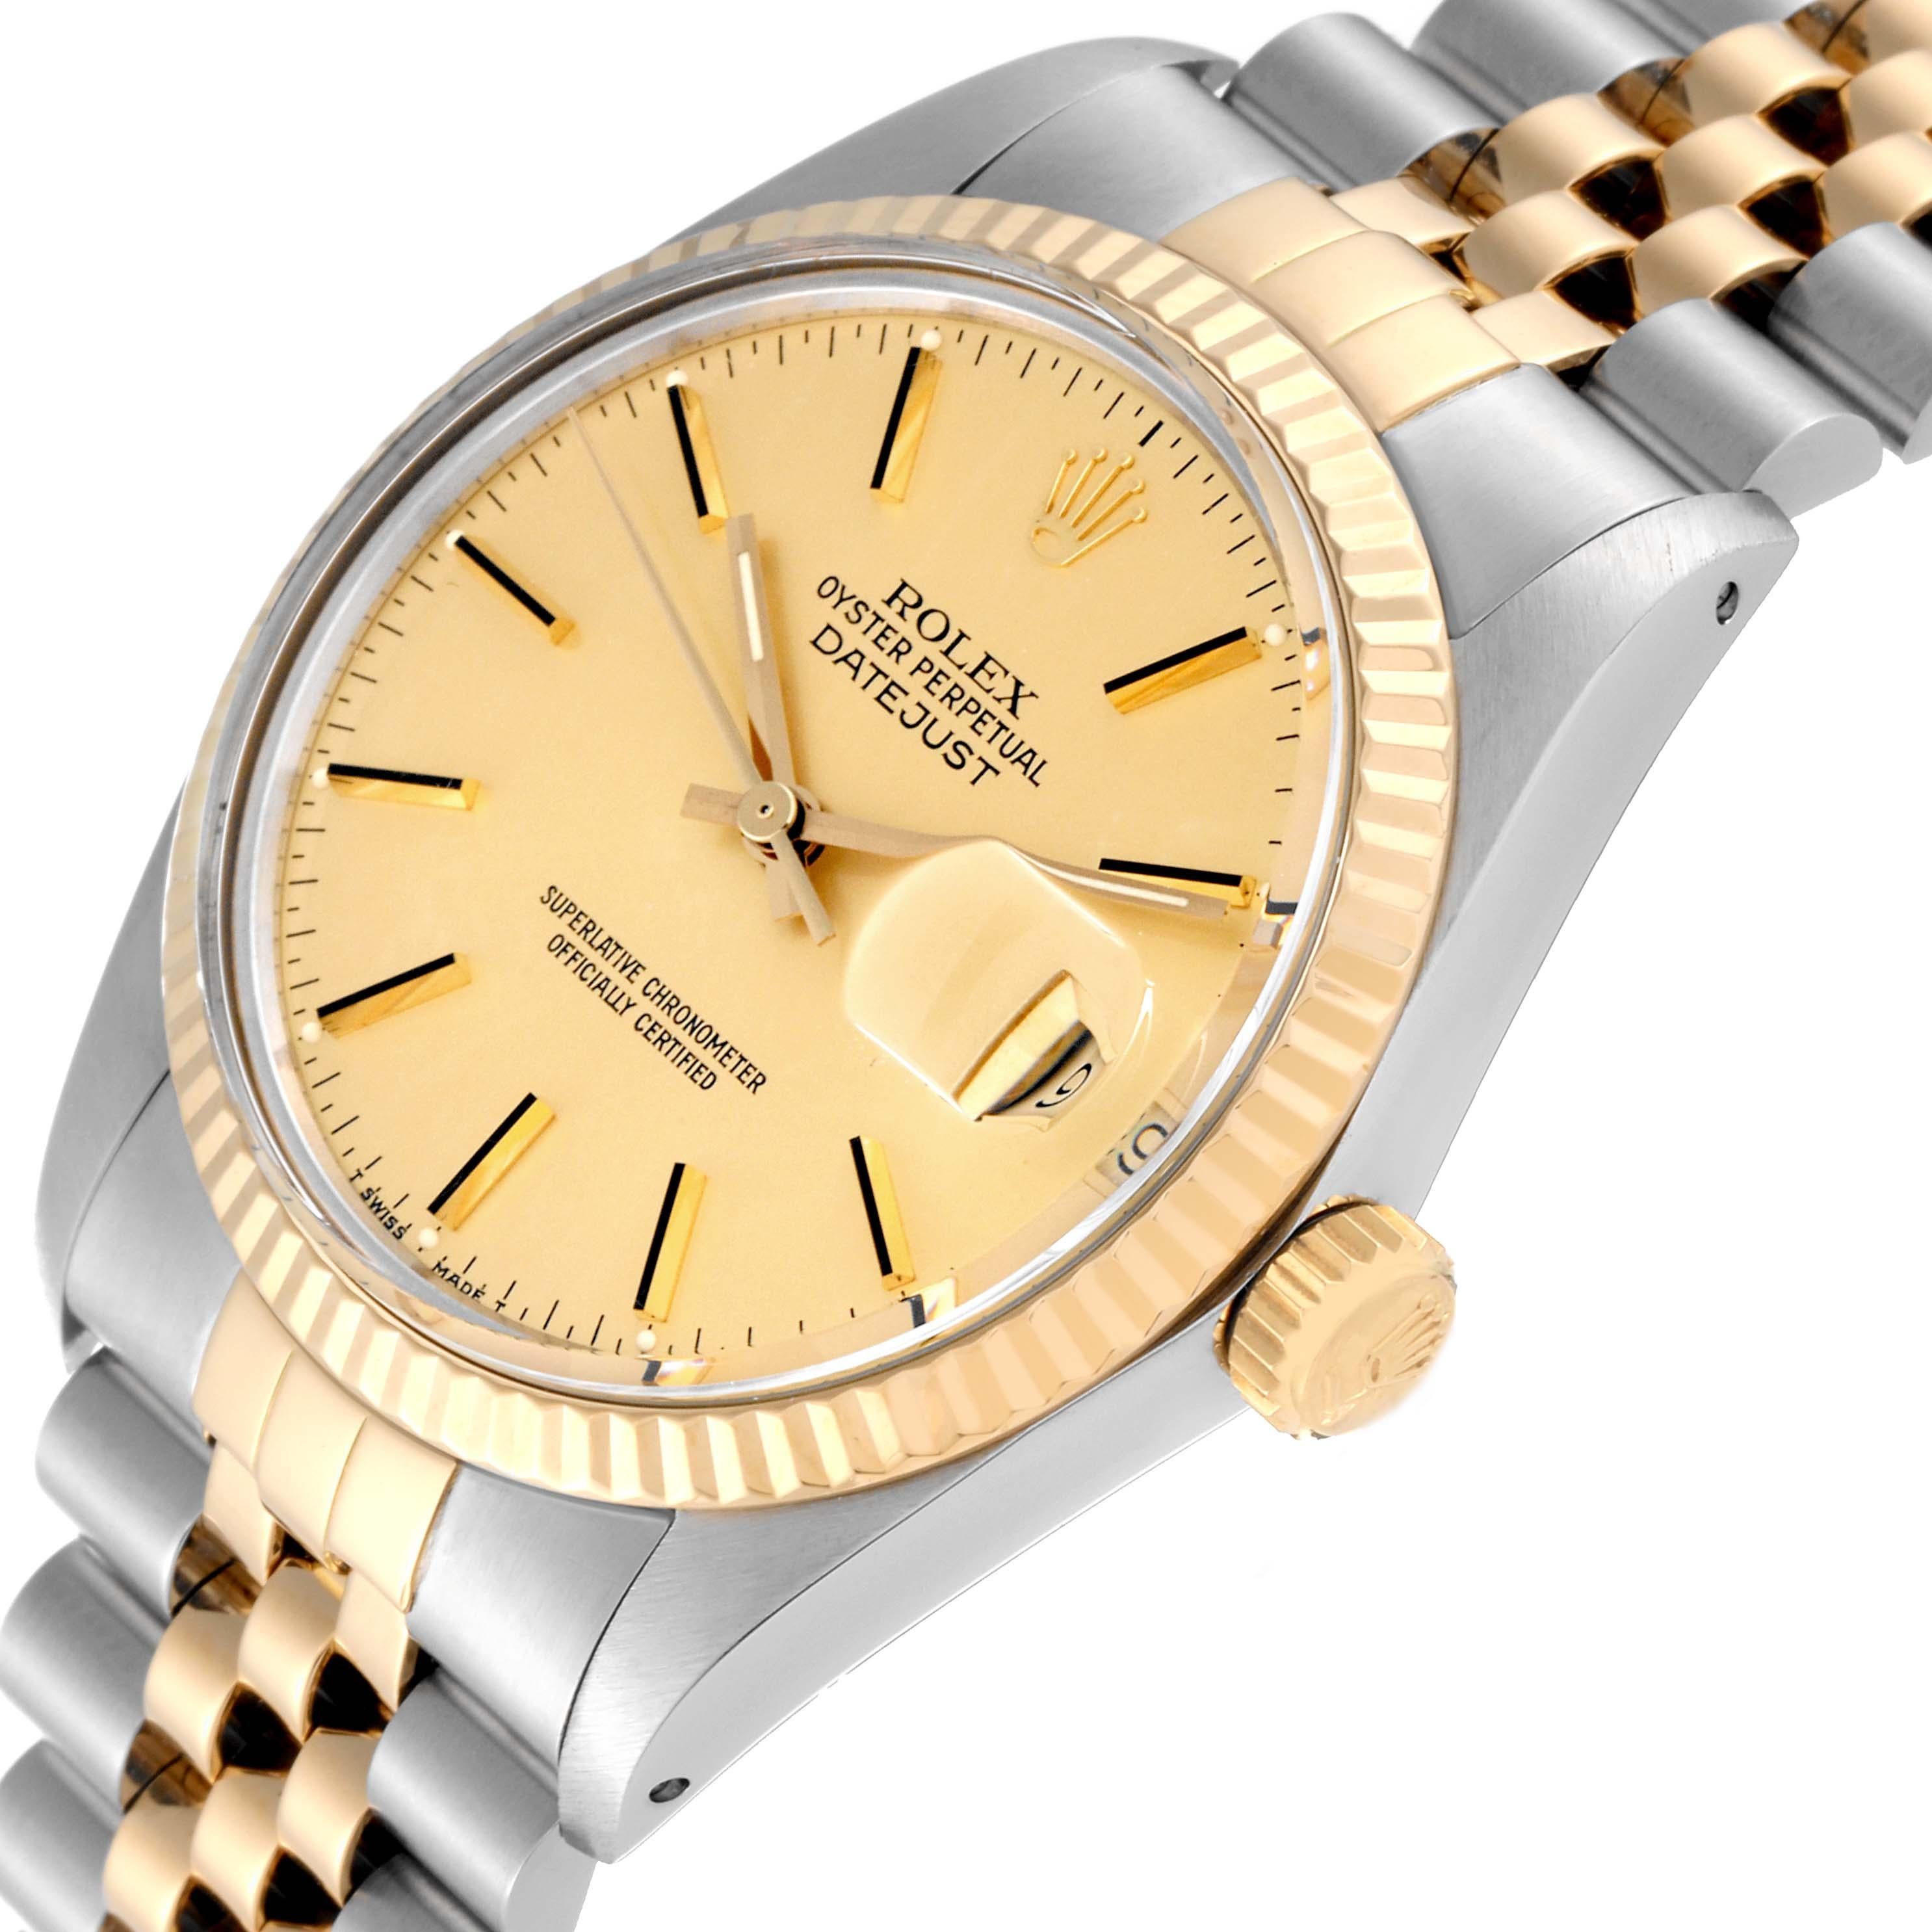 Men's Rolex Datejust Steel Yellow Gold Vintage Mens Watch 16013 Box Papers